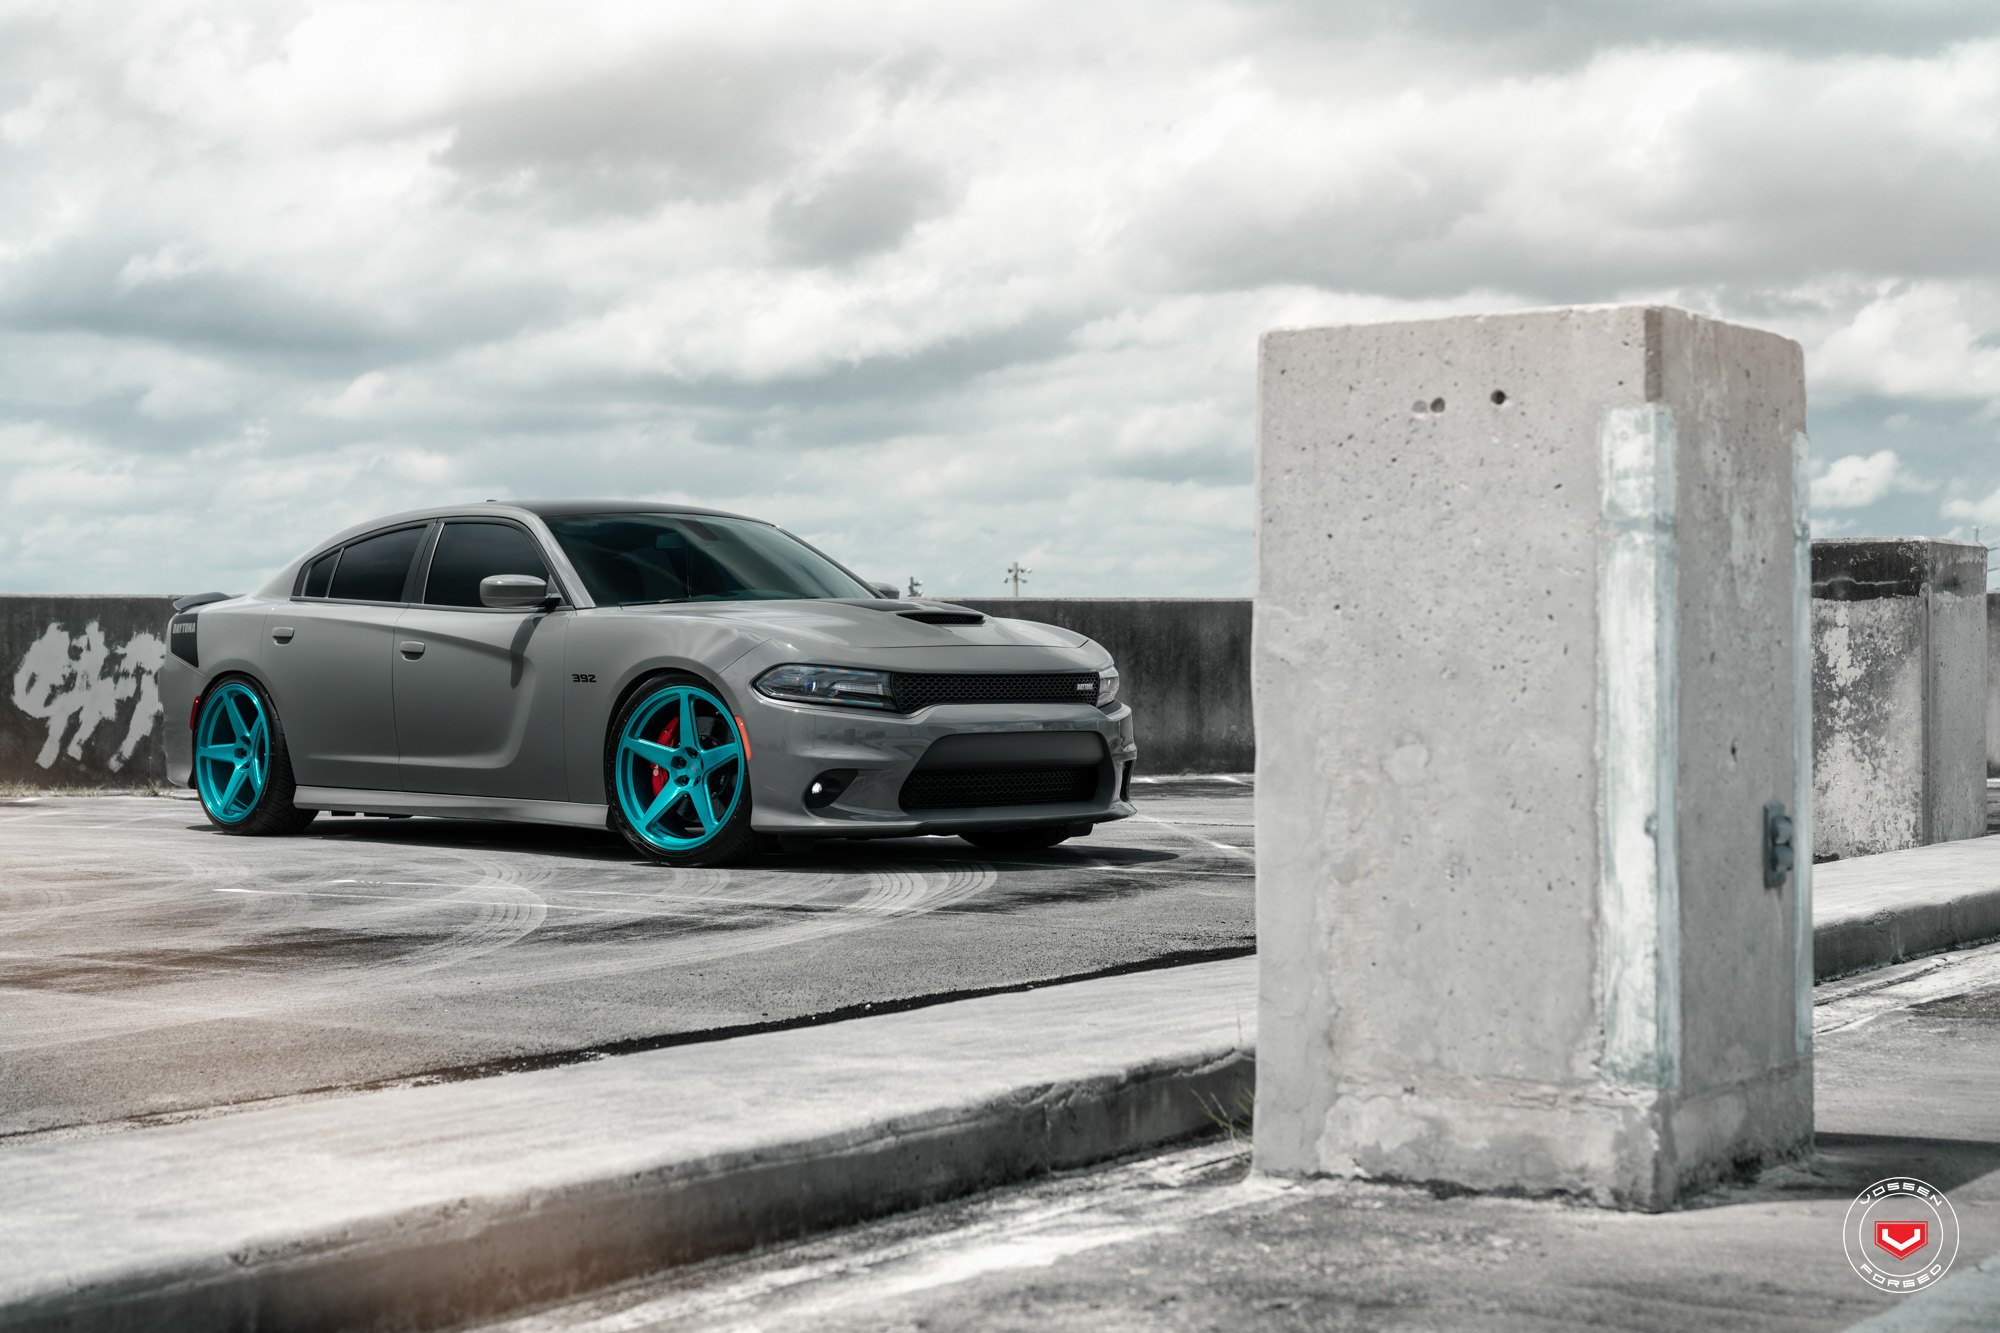 Aftermarket Front Bumper on Gray Dodge Charger Daytona - Photo by Vossen